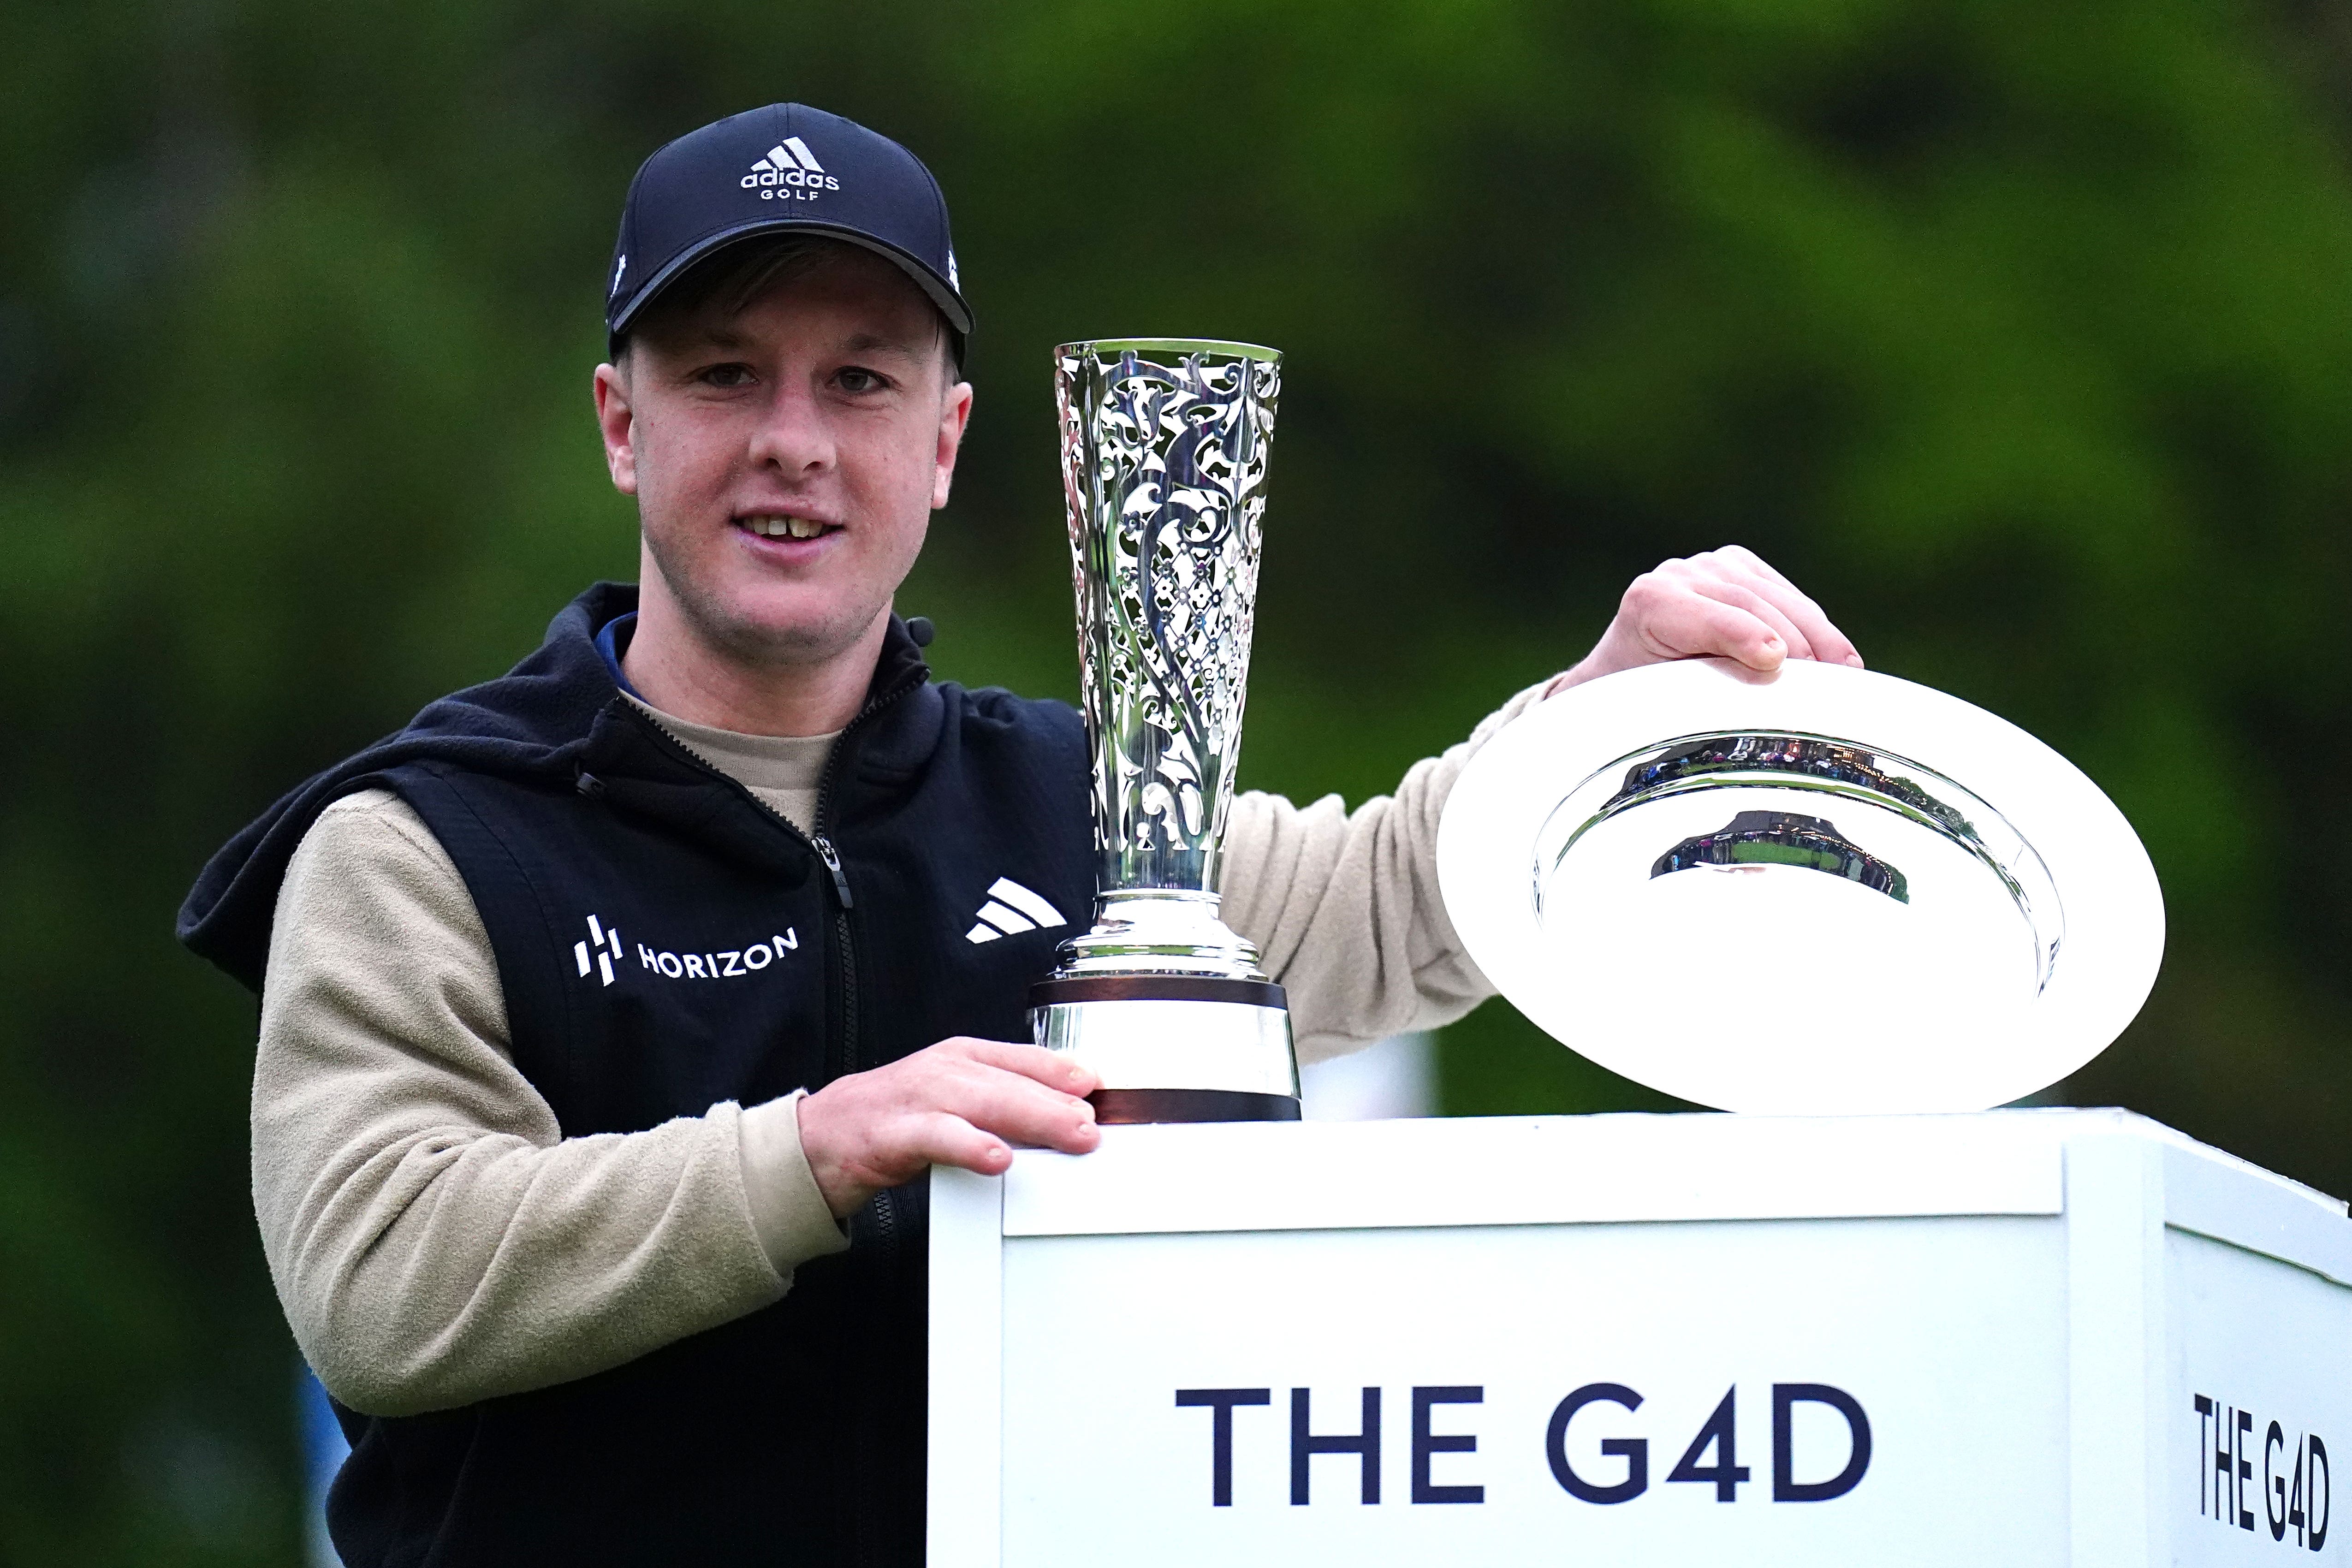 Brendan Lawlor poses with his trophy after winning The G4D Open at Woburn (Zac Goodwin/PA)